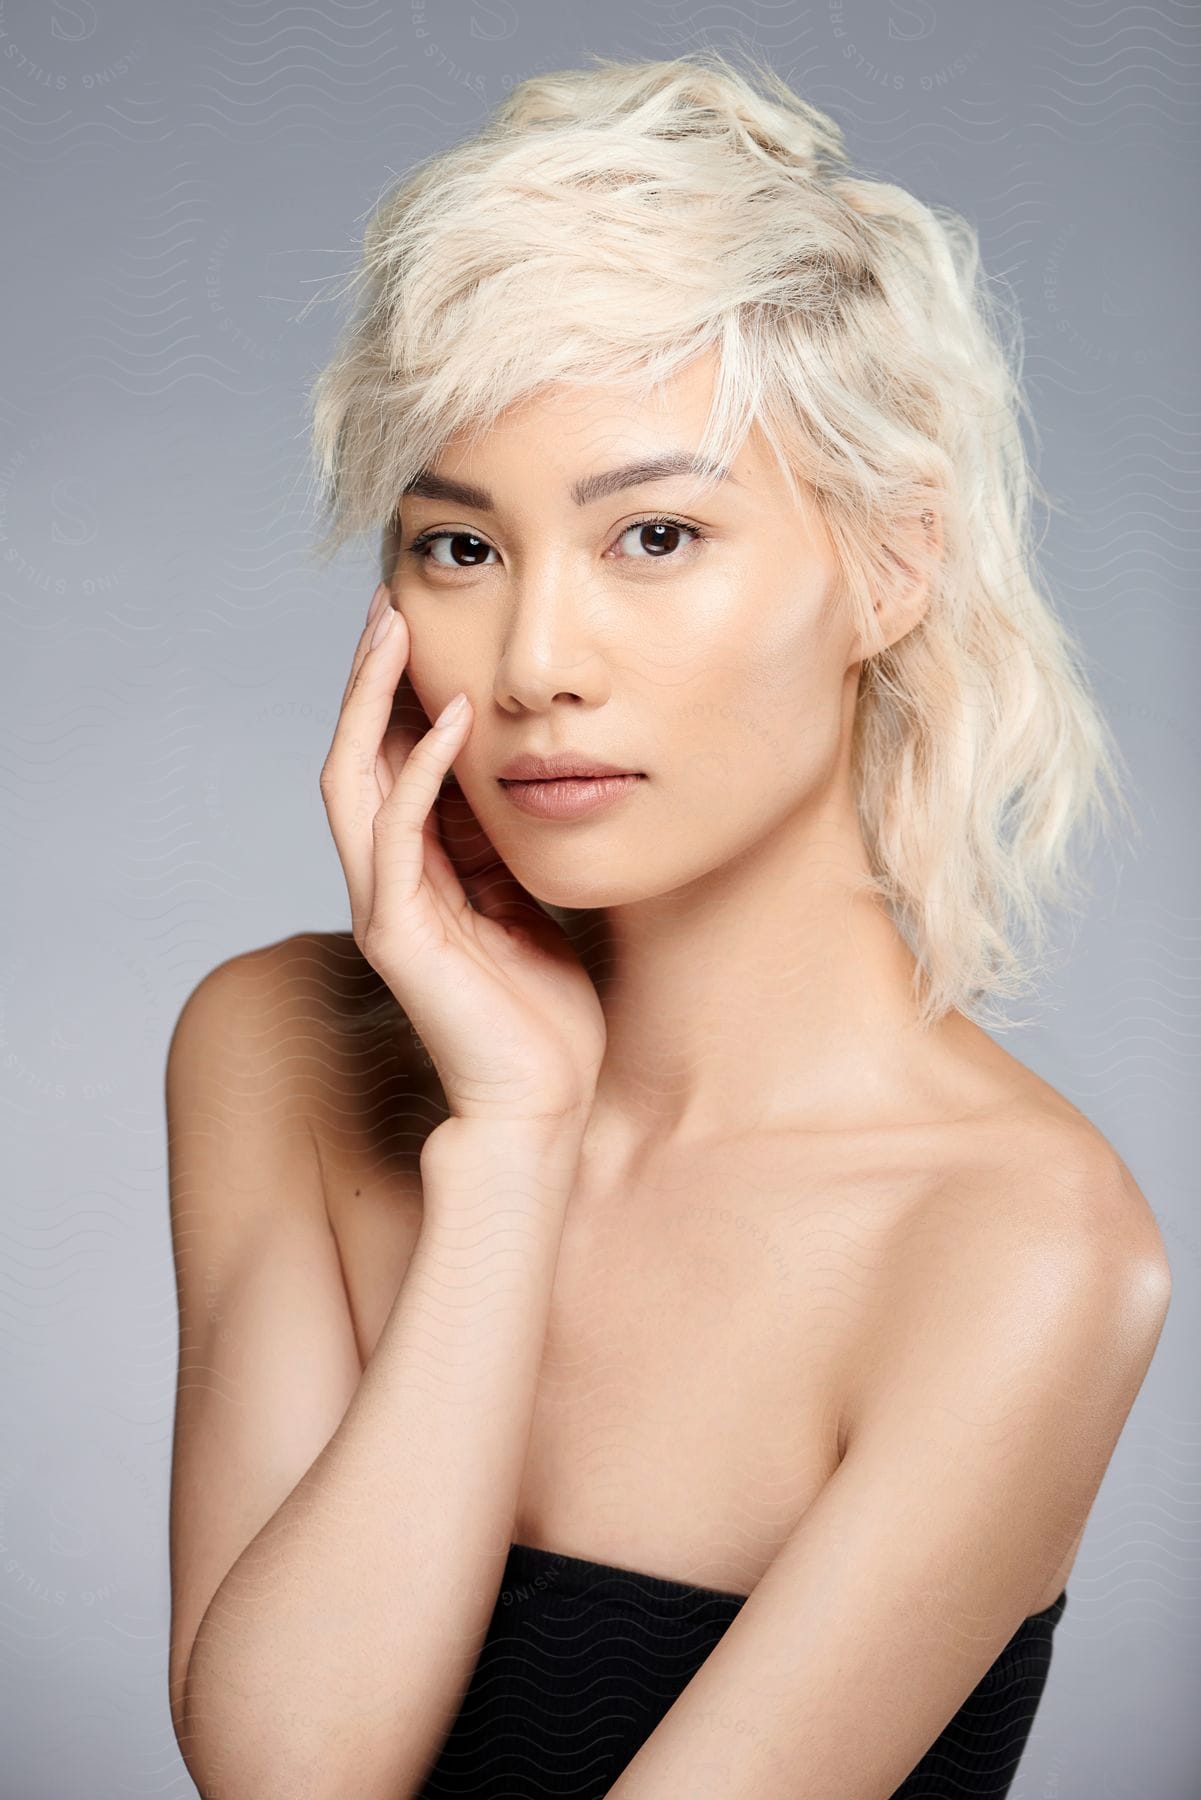 A bare shouldered blonde haired woman is looking ahead with her hand on her face